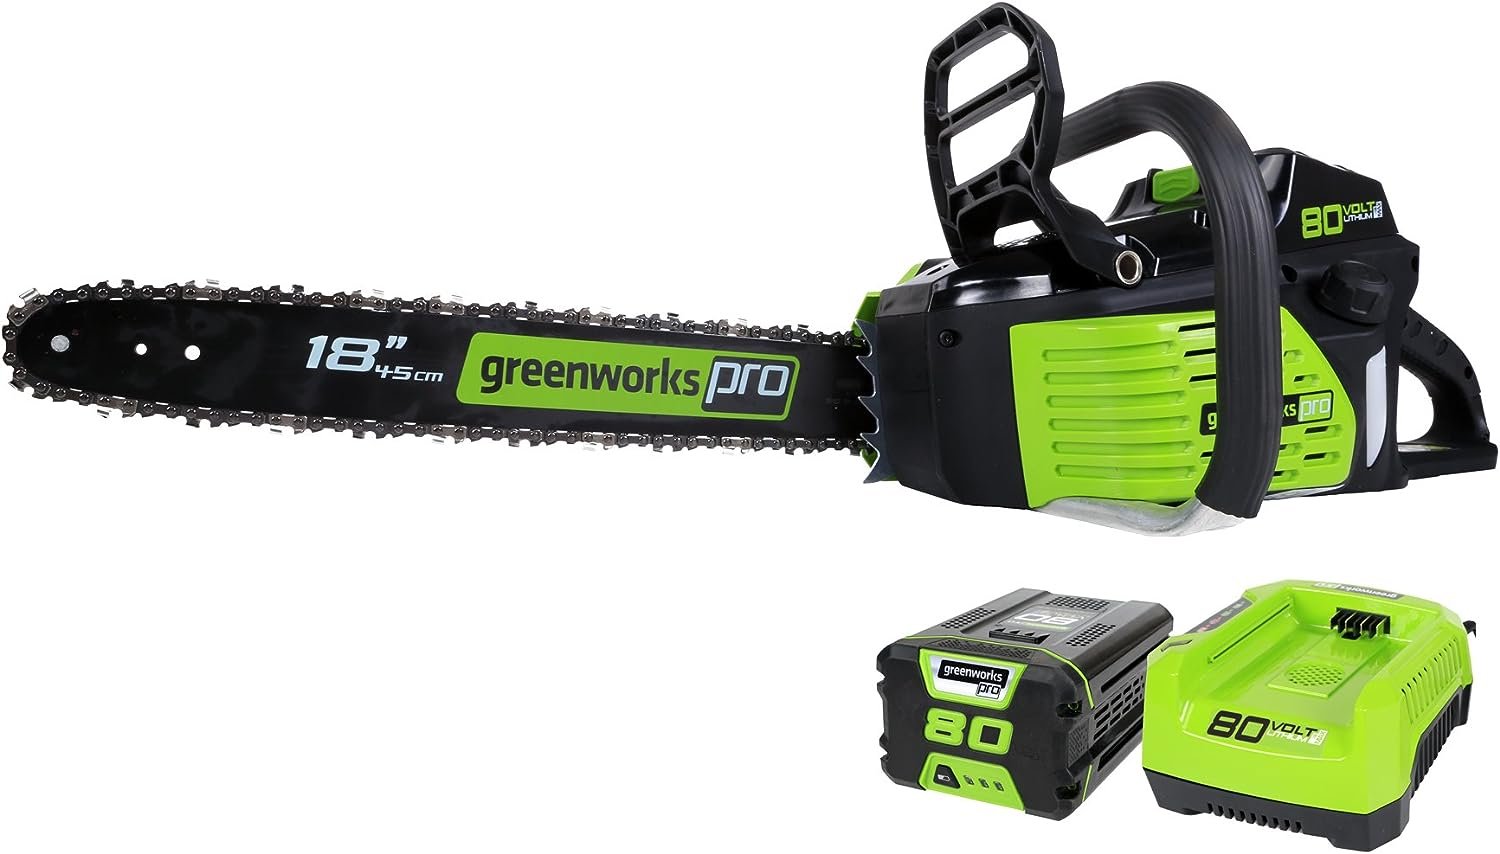 Greenworks 80V Chainsaw Review